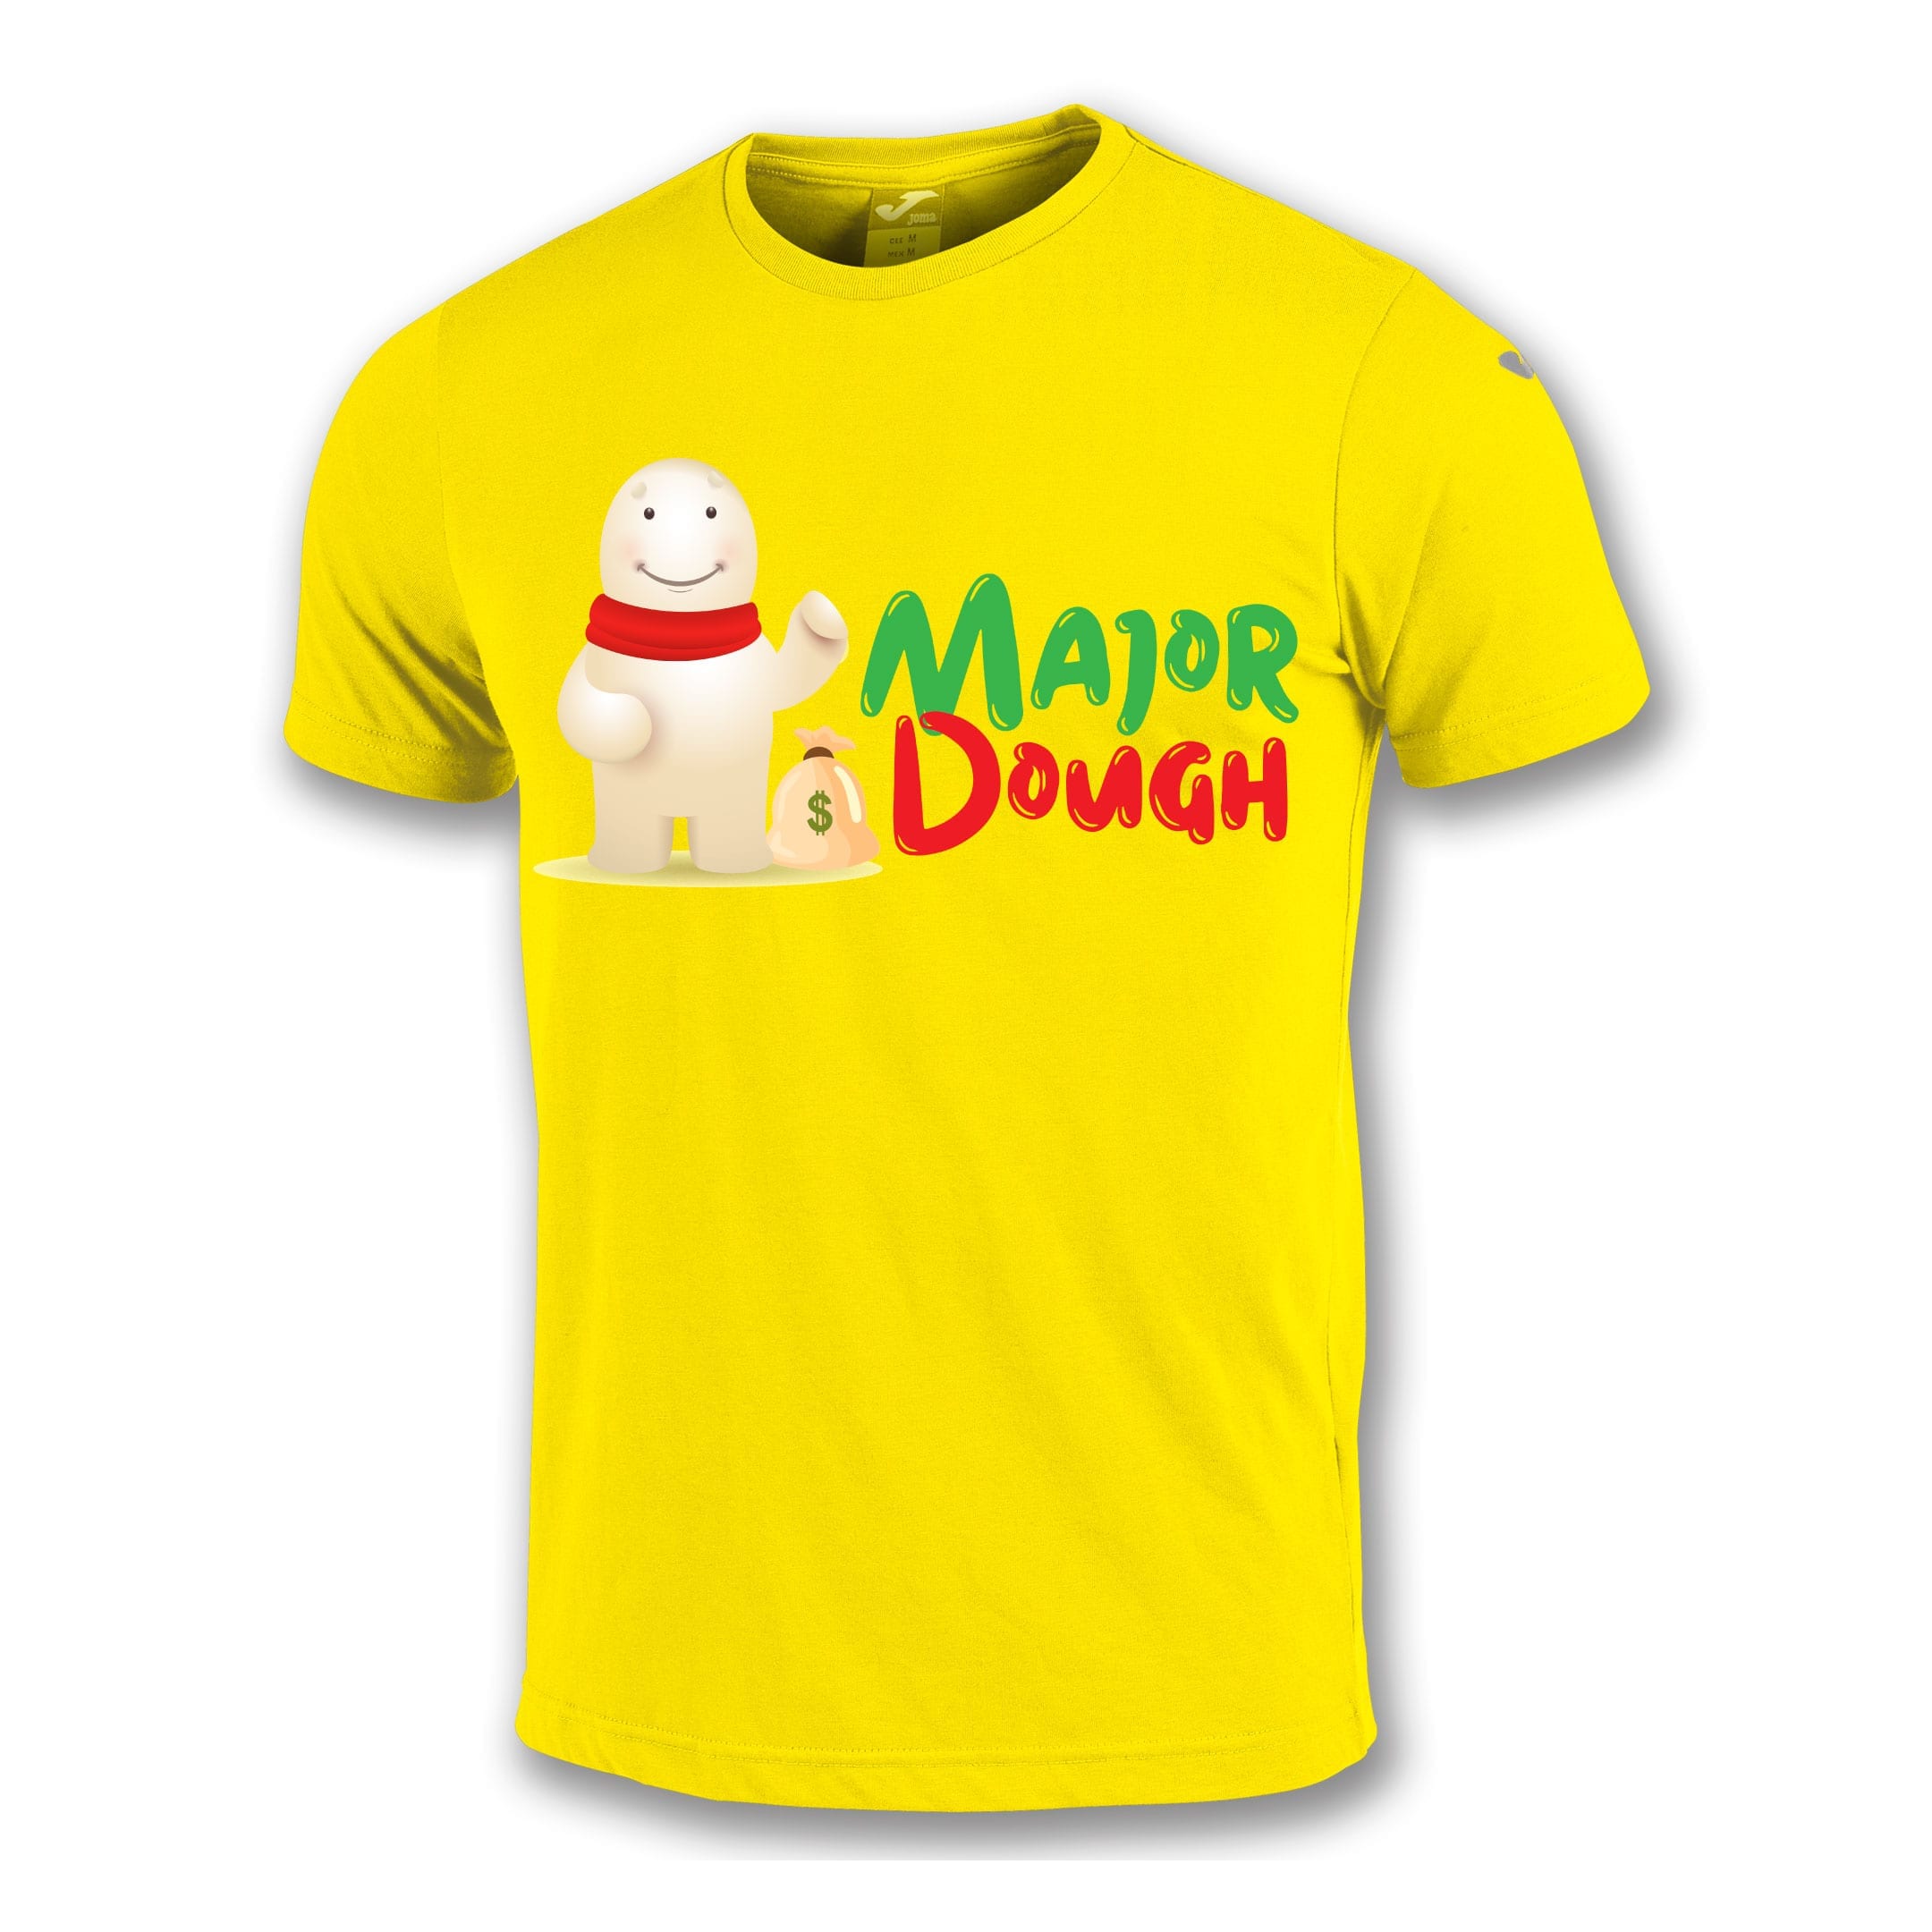 A bright yellow t-shirt with a playful graphic of a smiling cartoonish character wearing a white outfit with a red accessory on the head, alongside the colorful text "Major Dough."